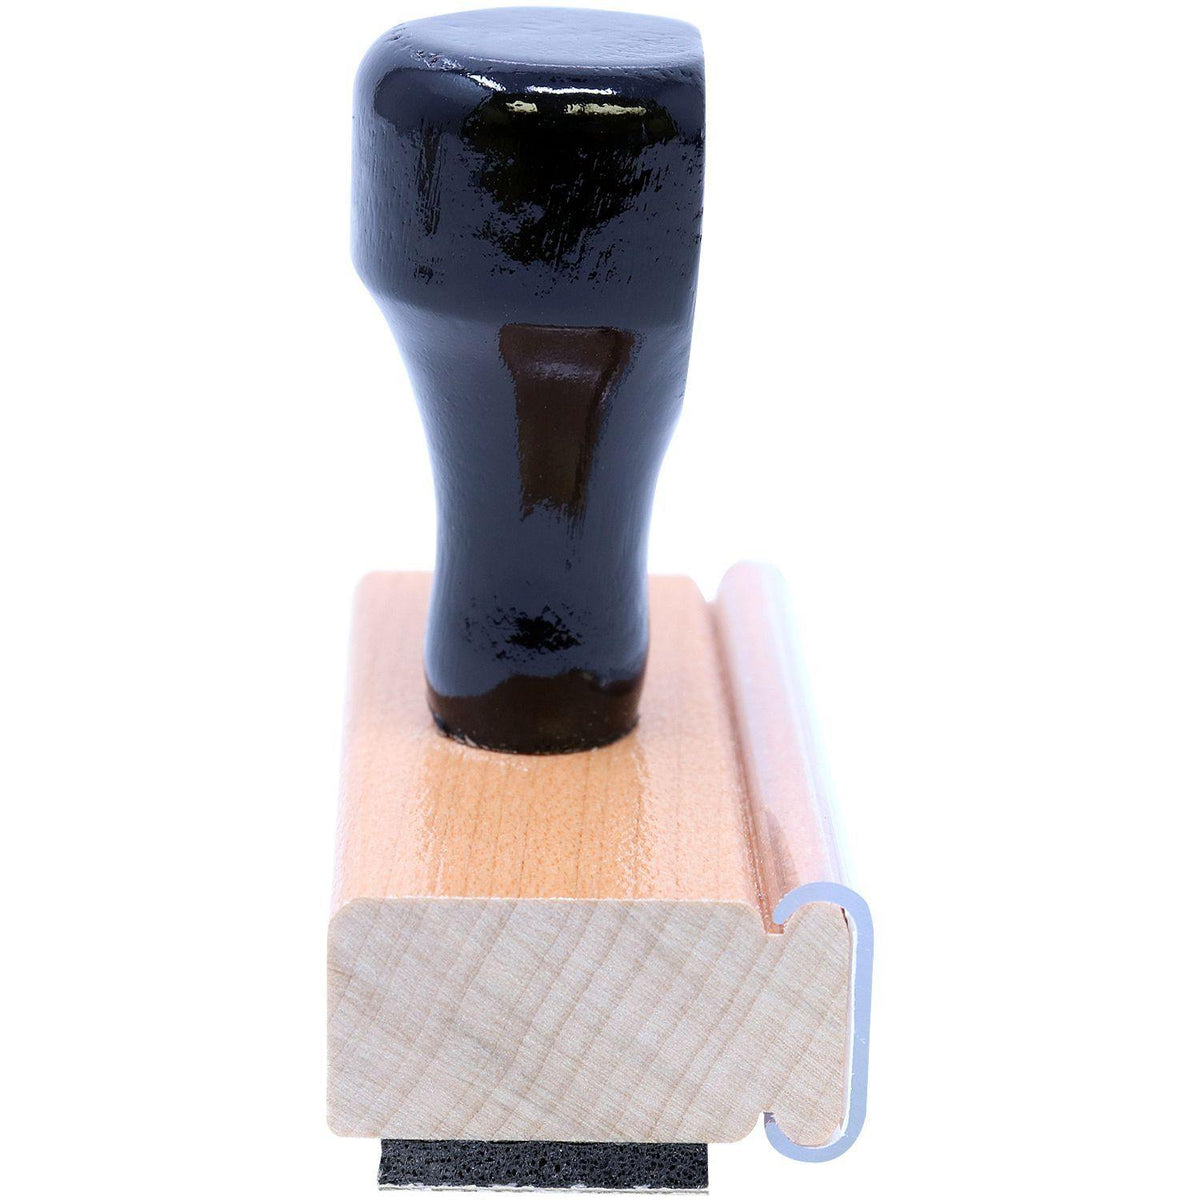 Paid with Date Line Rubber Stamp - Engineer Seal Stamps - Brand_Acorn, Impression Size_Small, Stamp Type_Regular Stamp, Type of Use_Accounting, Type of Use_Business, Type of Use_Finance